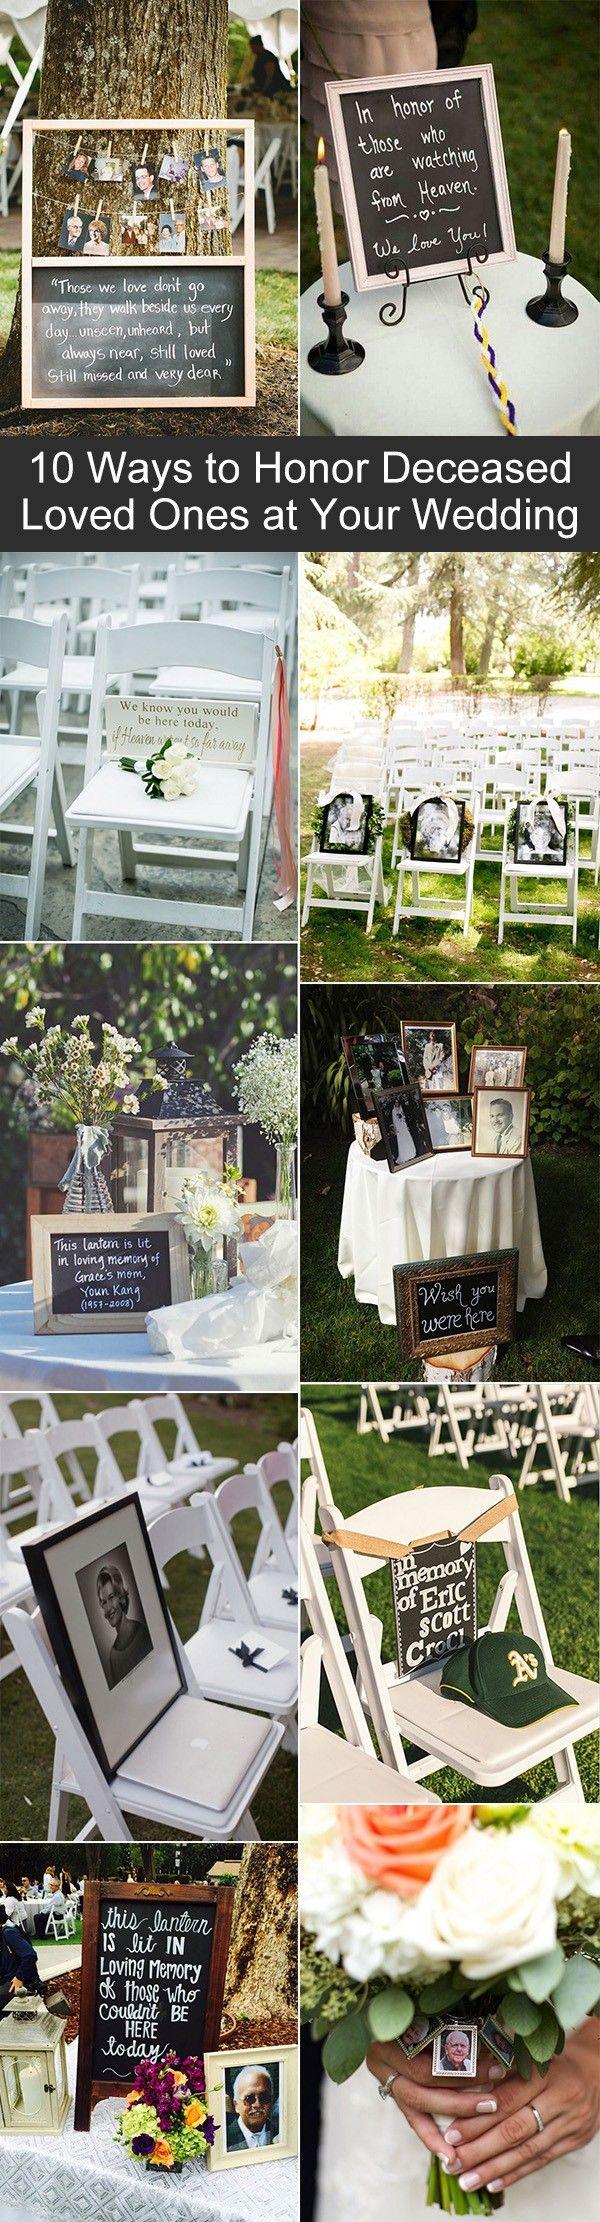 Wedding - 10 Unique Ways To Honor Deceased Loved Ones At Your Wedding